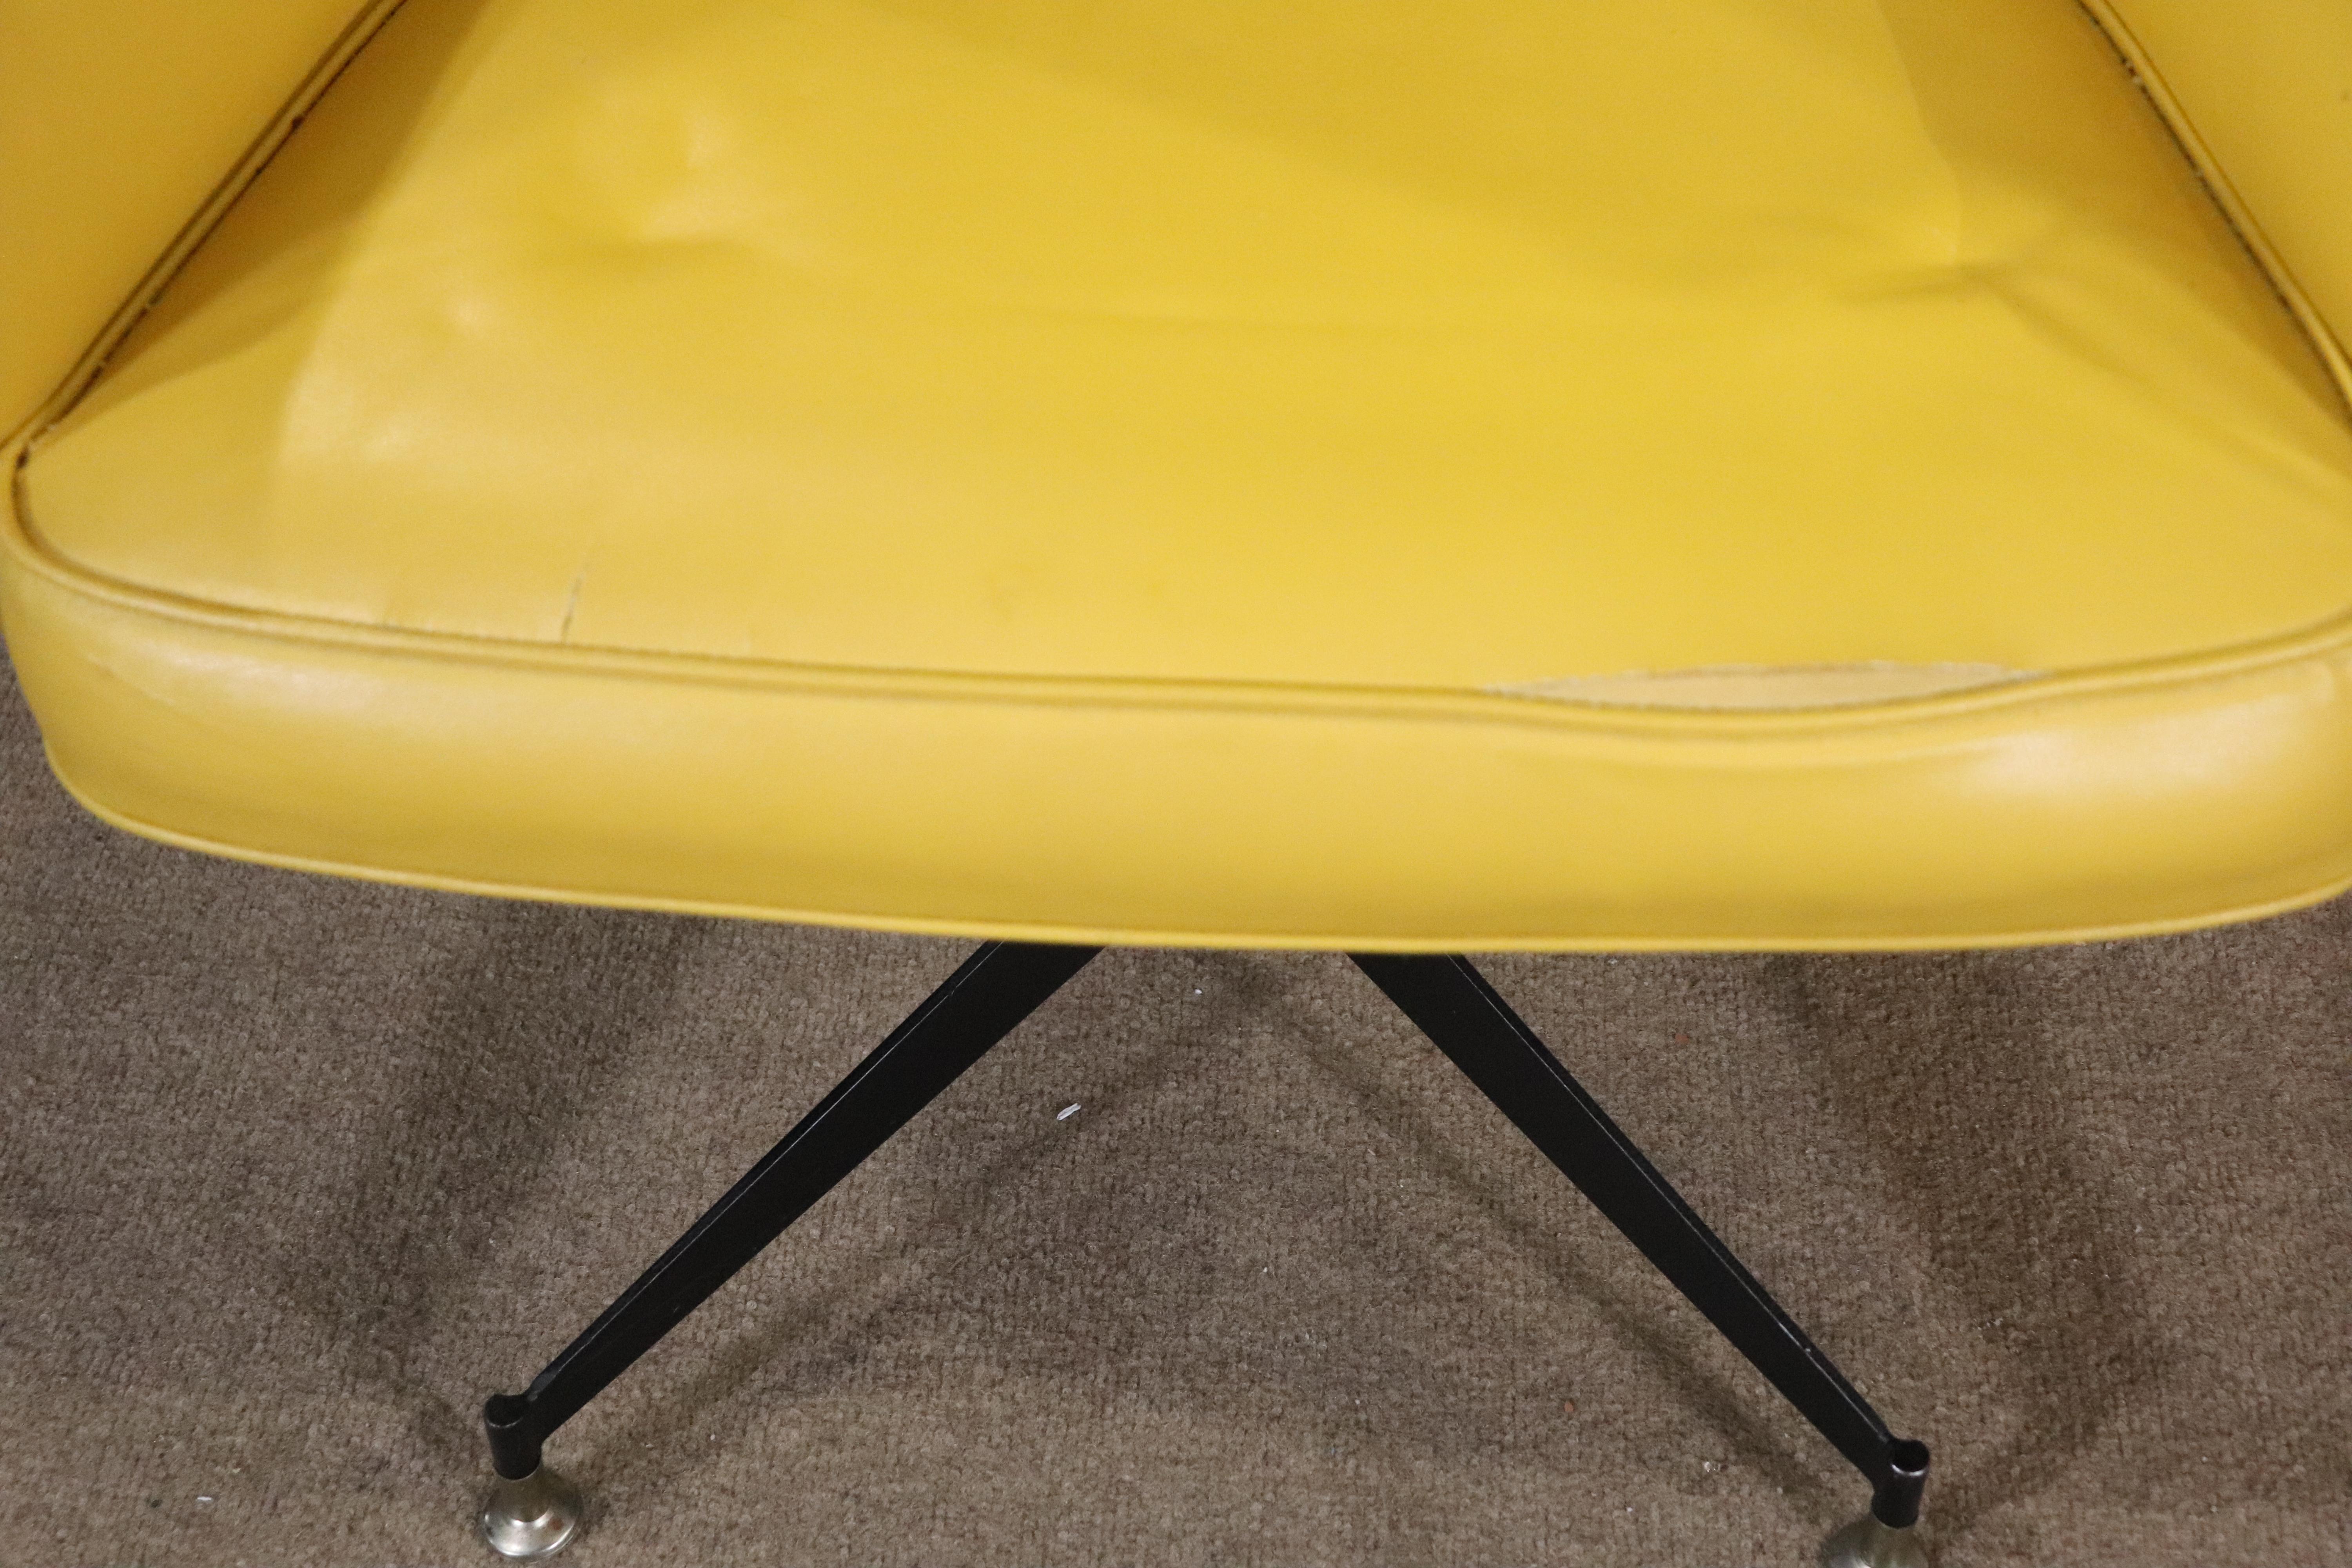 Mid-Century modern style dining chairs in yellow vinyl with bentwood backs. All chairs have low arms and black metal bases. 
Please confirm location NY or NJ